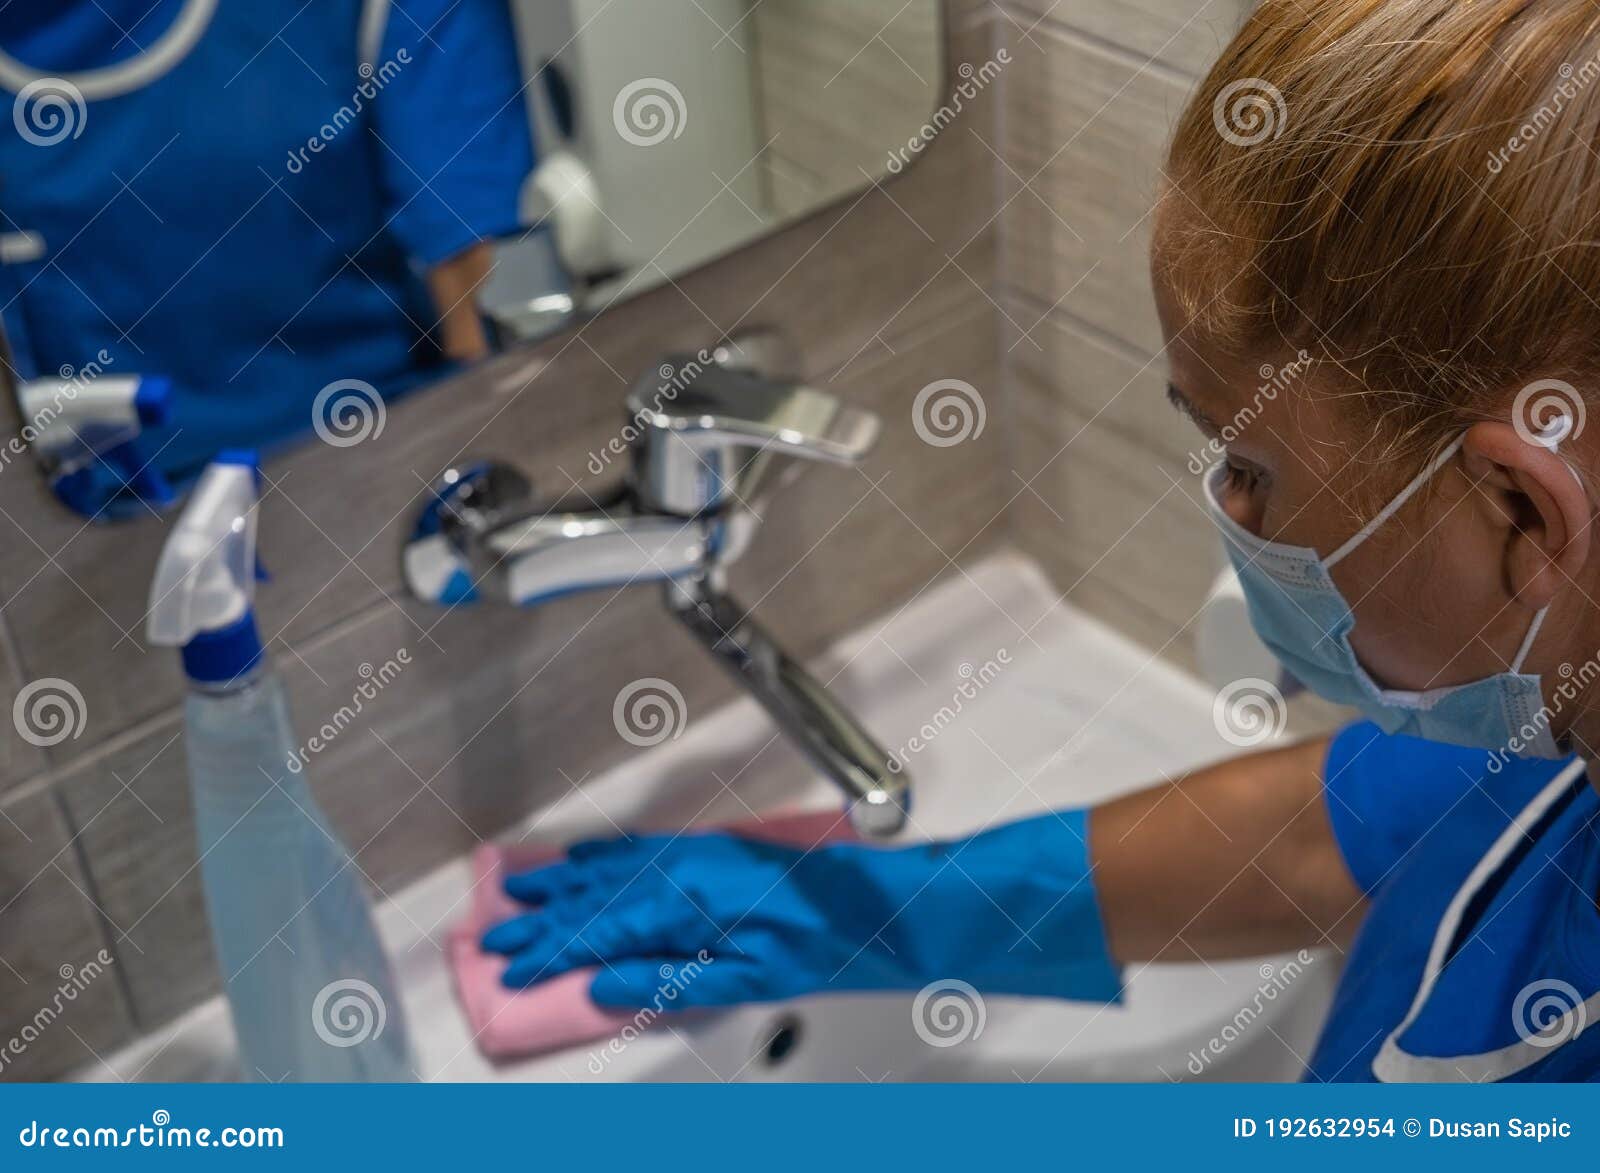 a cleaning leady with mask on her face cleans the washbasin